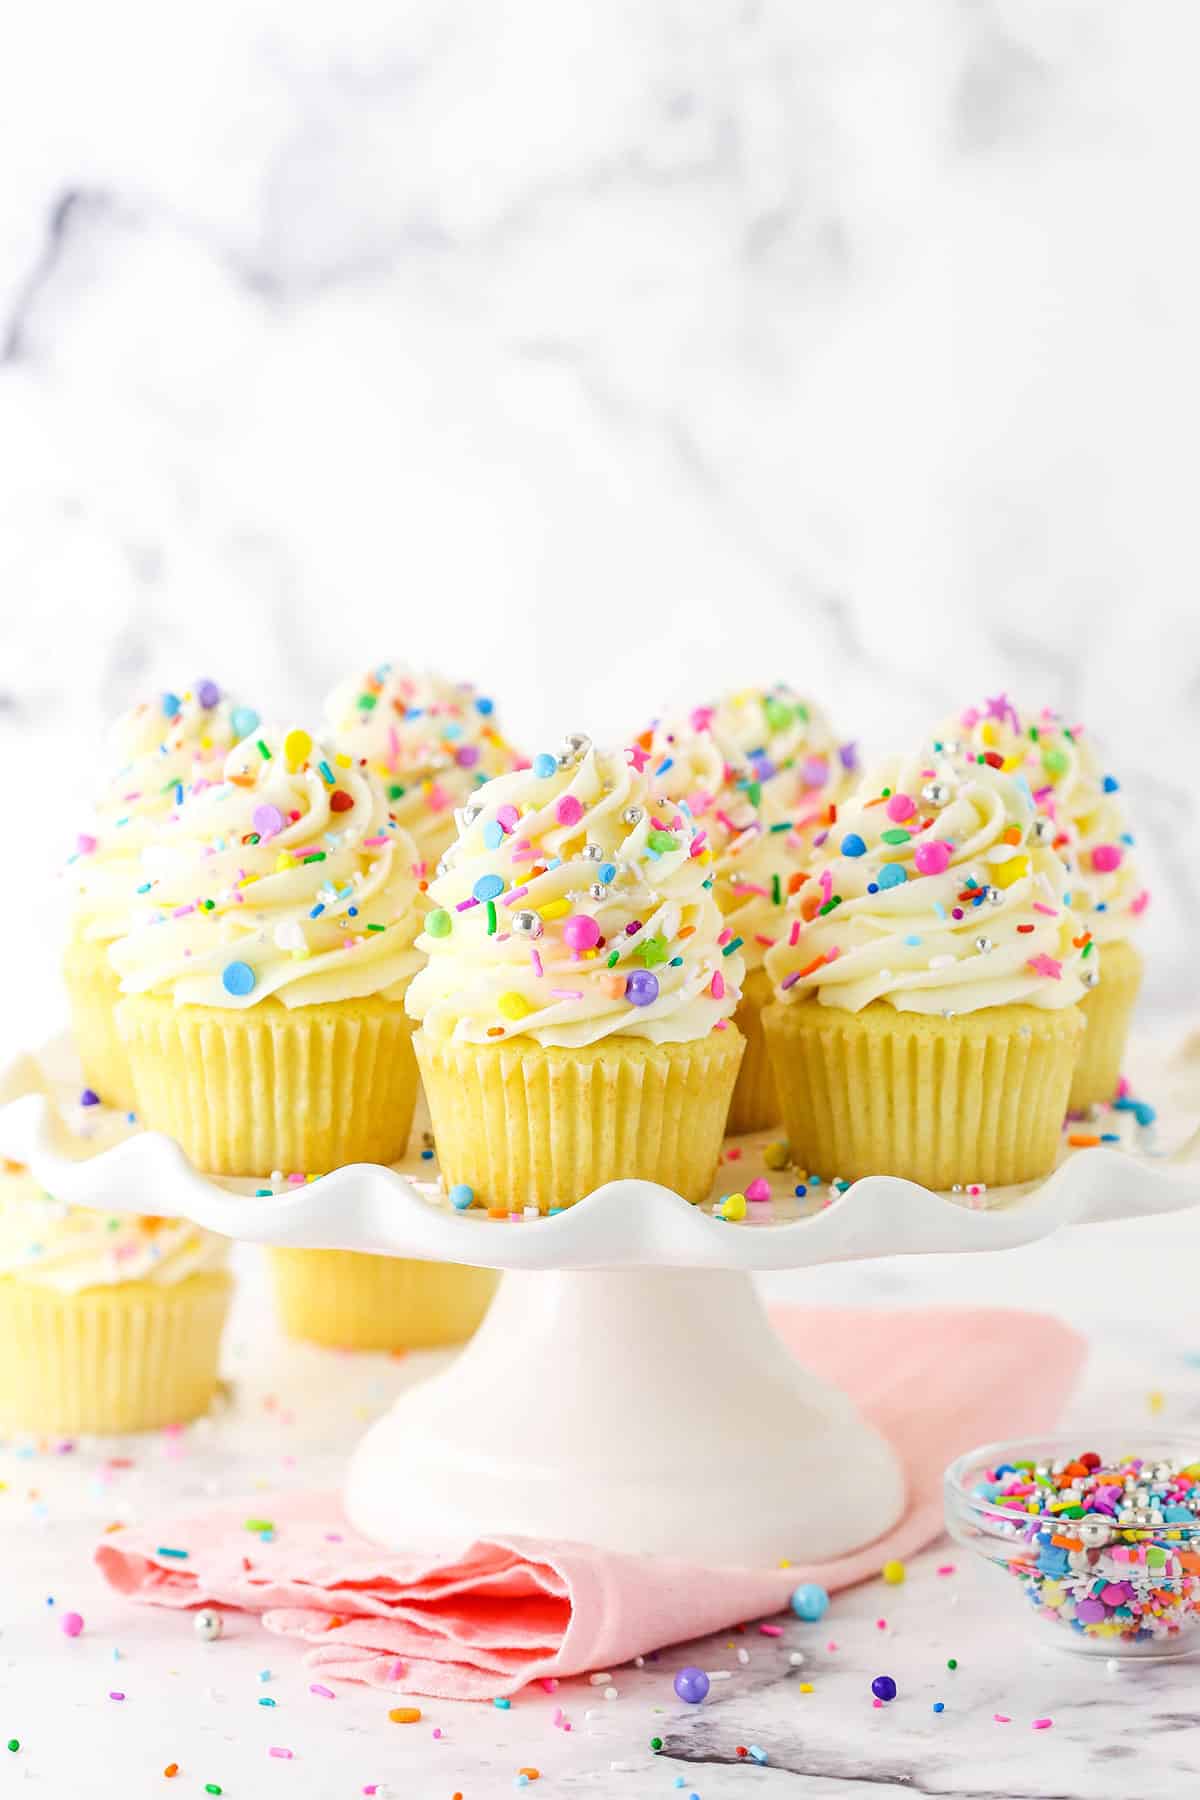 Homemade vanilla cupcakes with sprinkles on a white stand